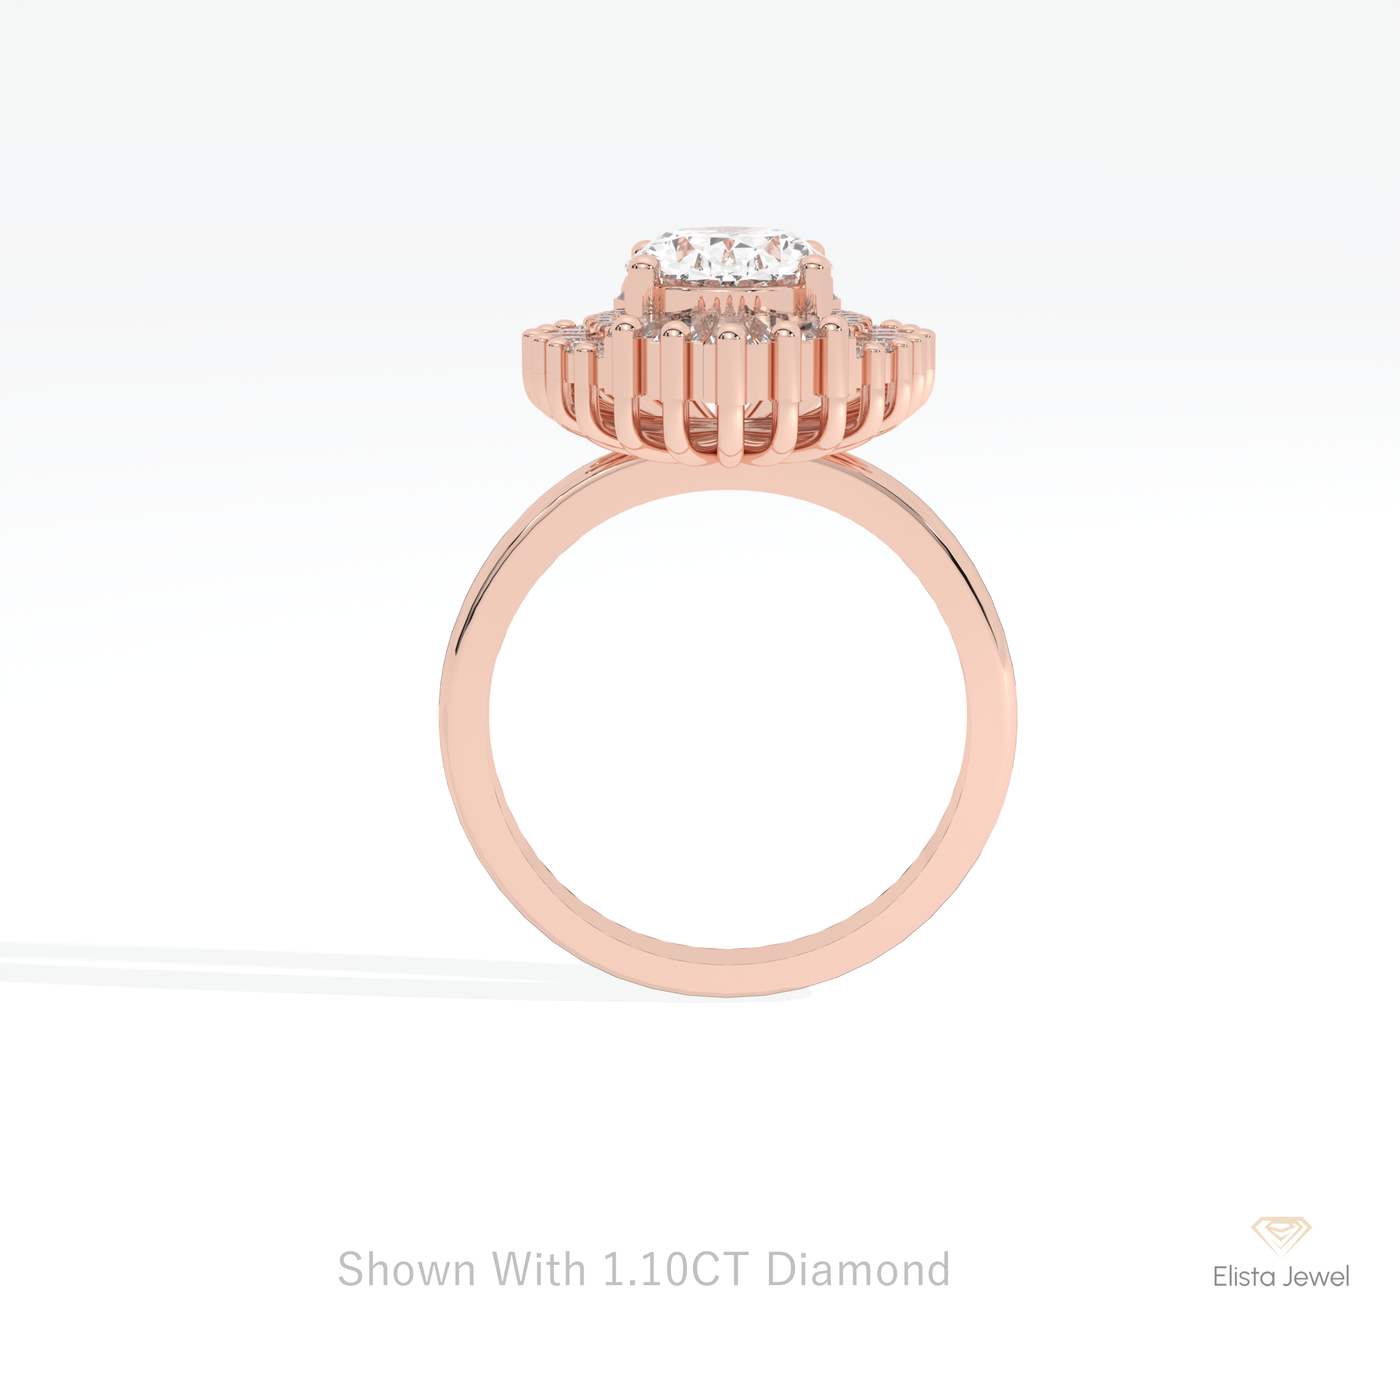 Oval Cut Starburst Engagement Ring